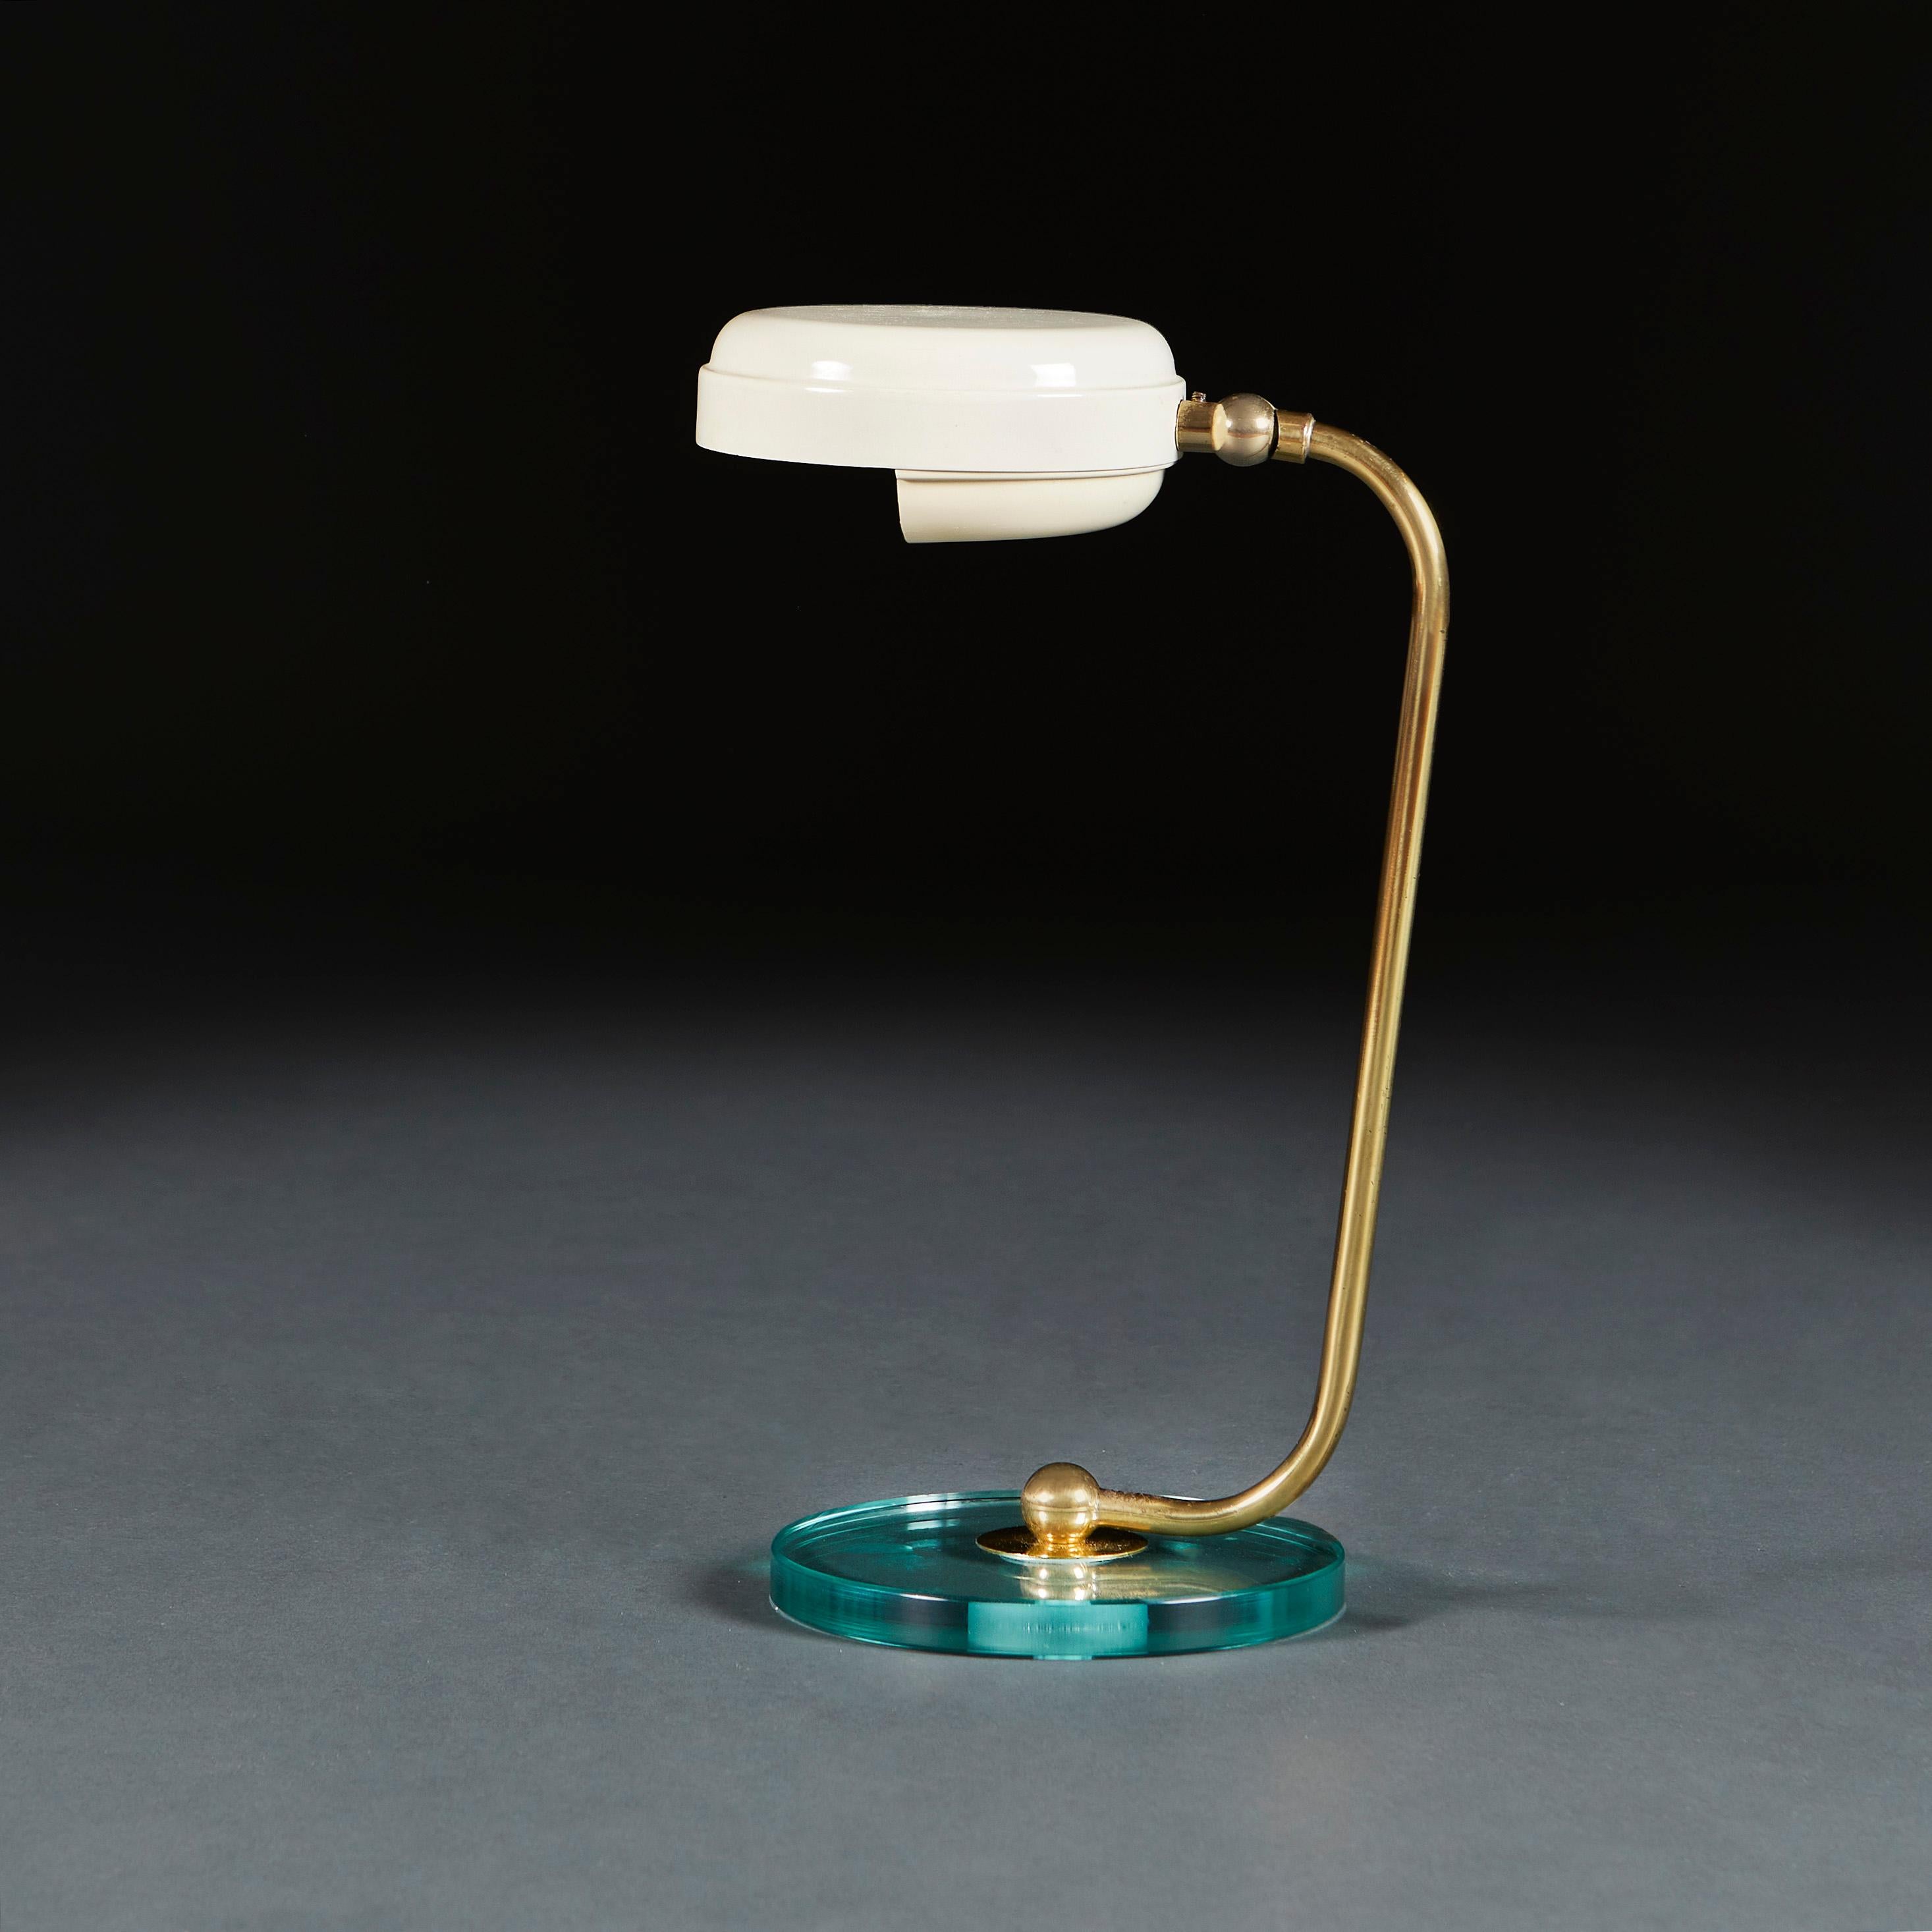 Italy, circa 1950

A mid 20th century desk lamp with circular glass base, curved brass stem, and articualted cream enamel disc form shade. Attributed to Fontana Arte.

Height 33.00cm
Width 15.00cm
Depth 20.00cm

Please note: This is currently wired